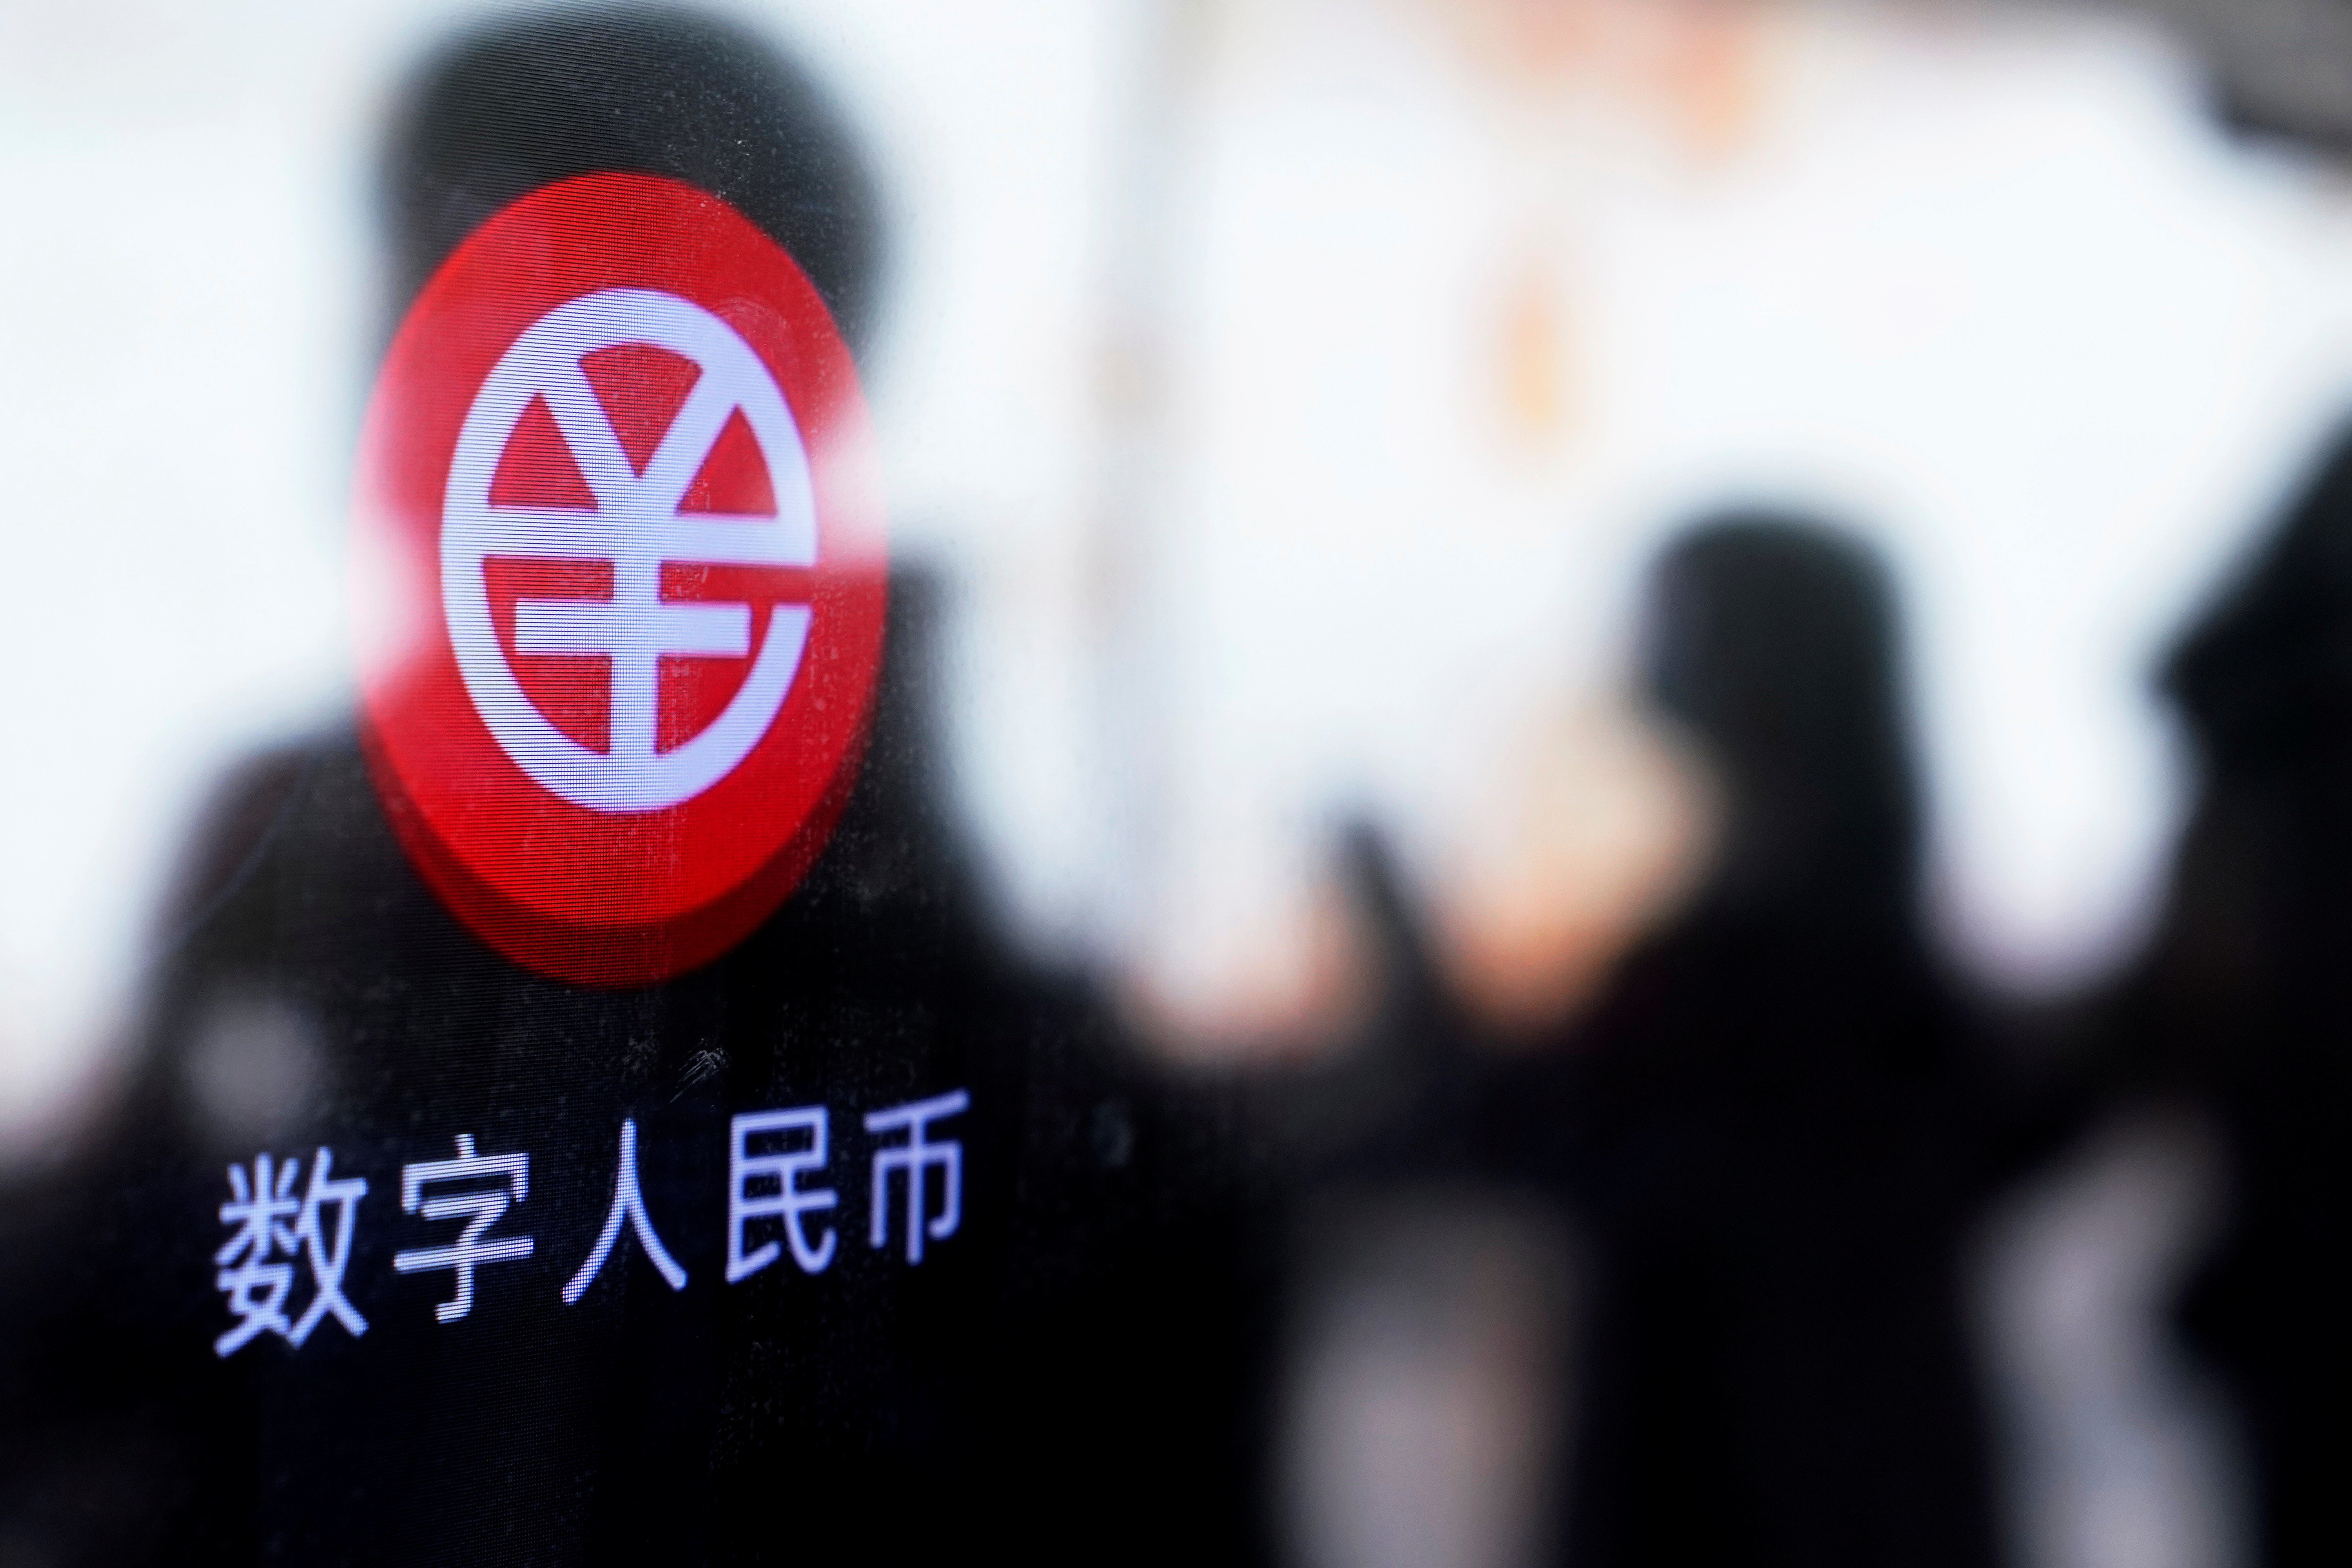 China’s digital yuan is one of the most advanced CBDC initiatives in the world. Photo: Reuters